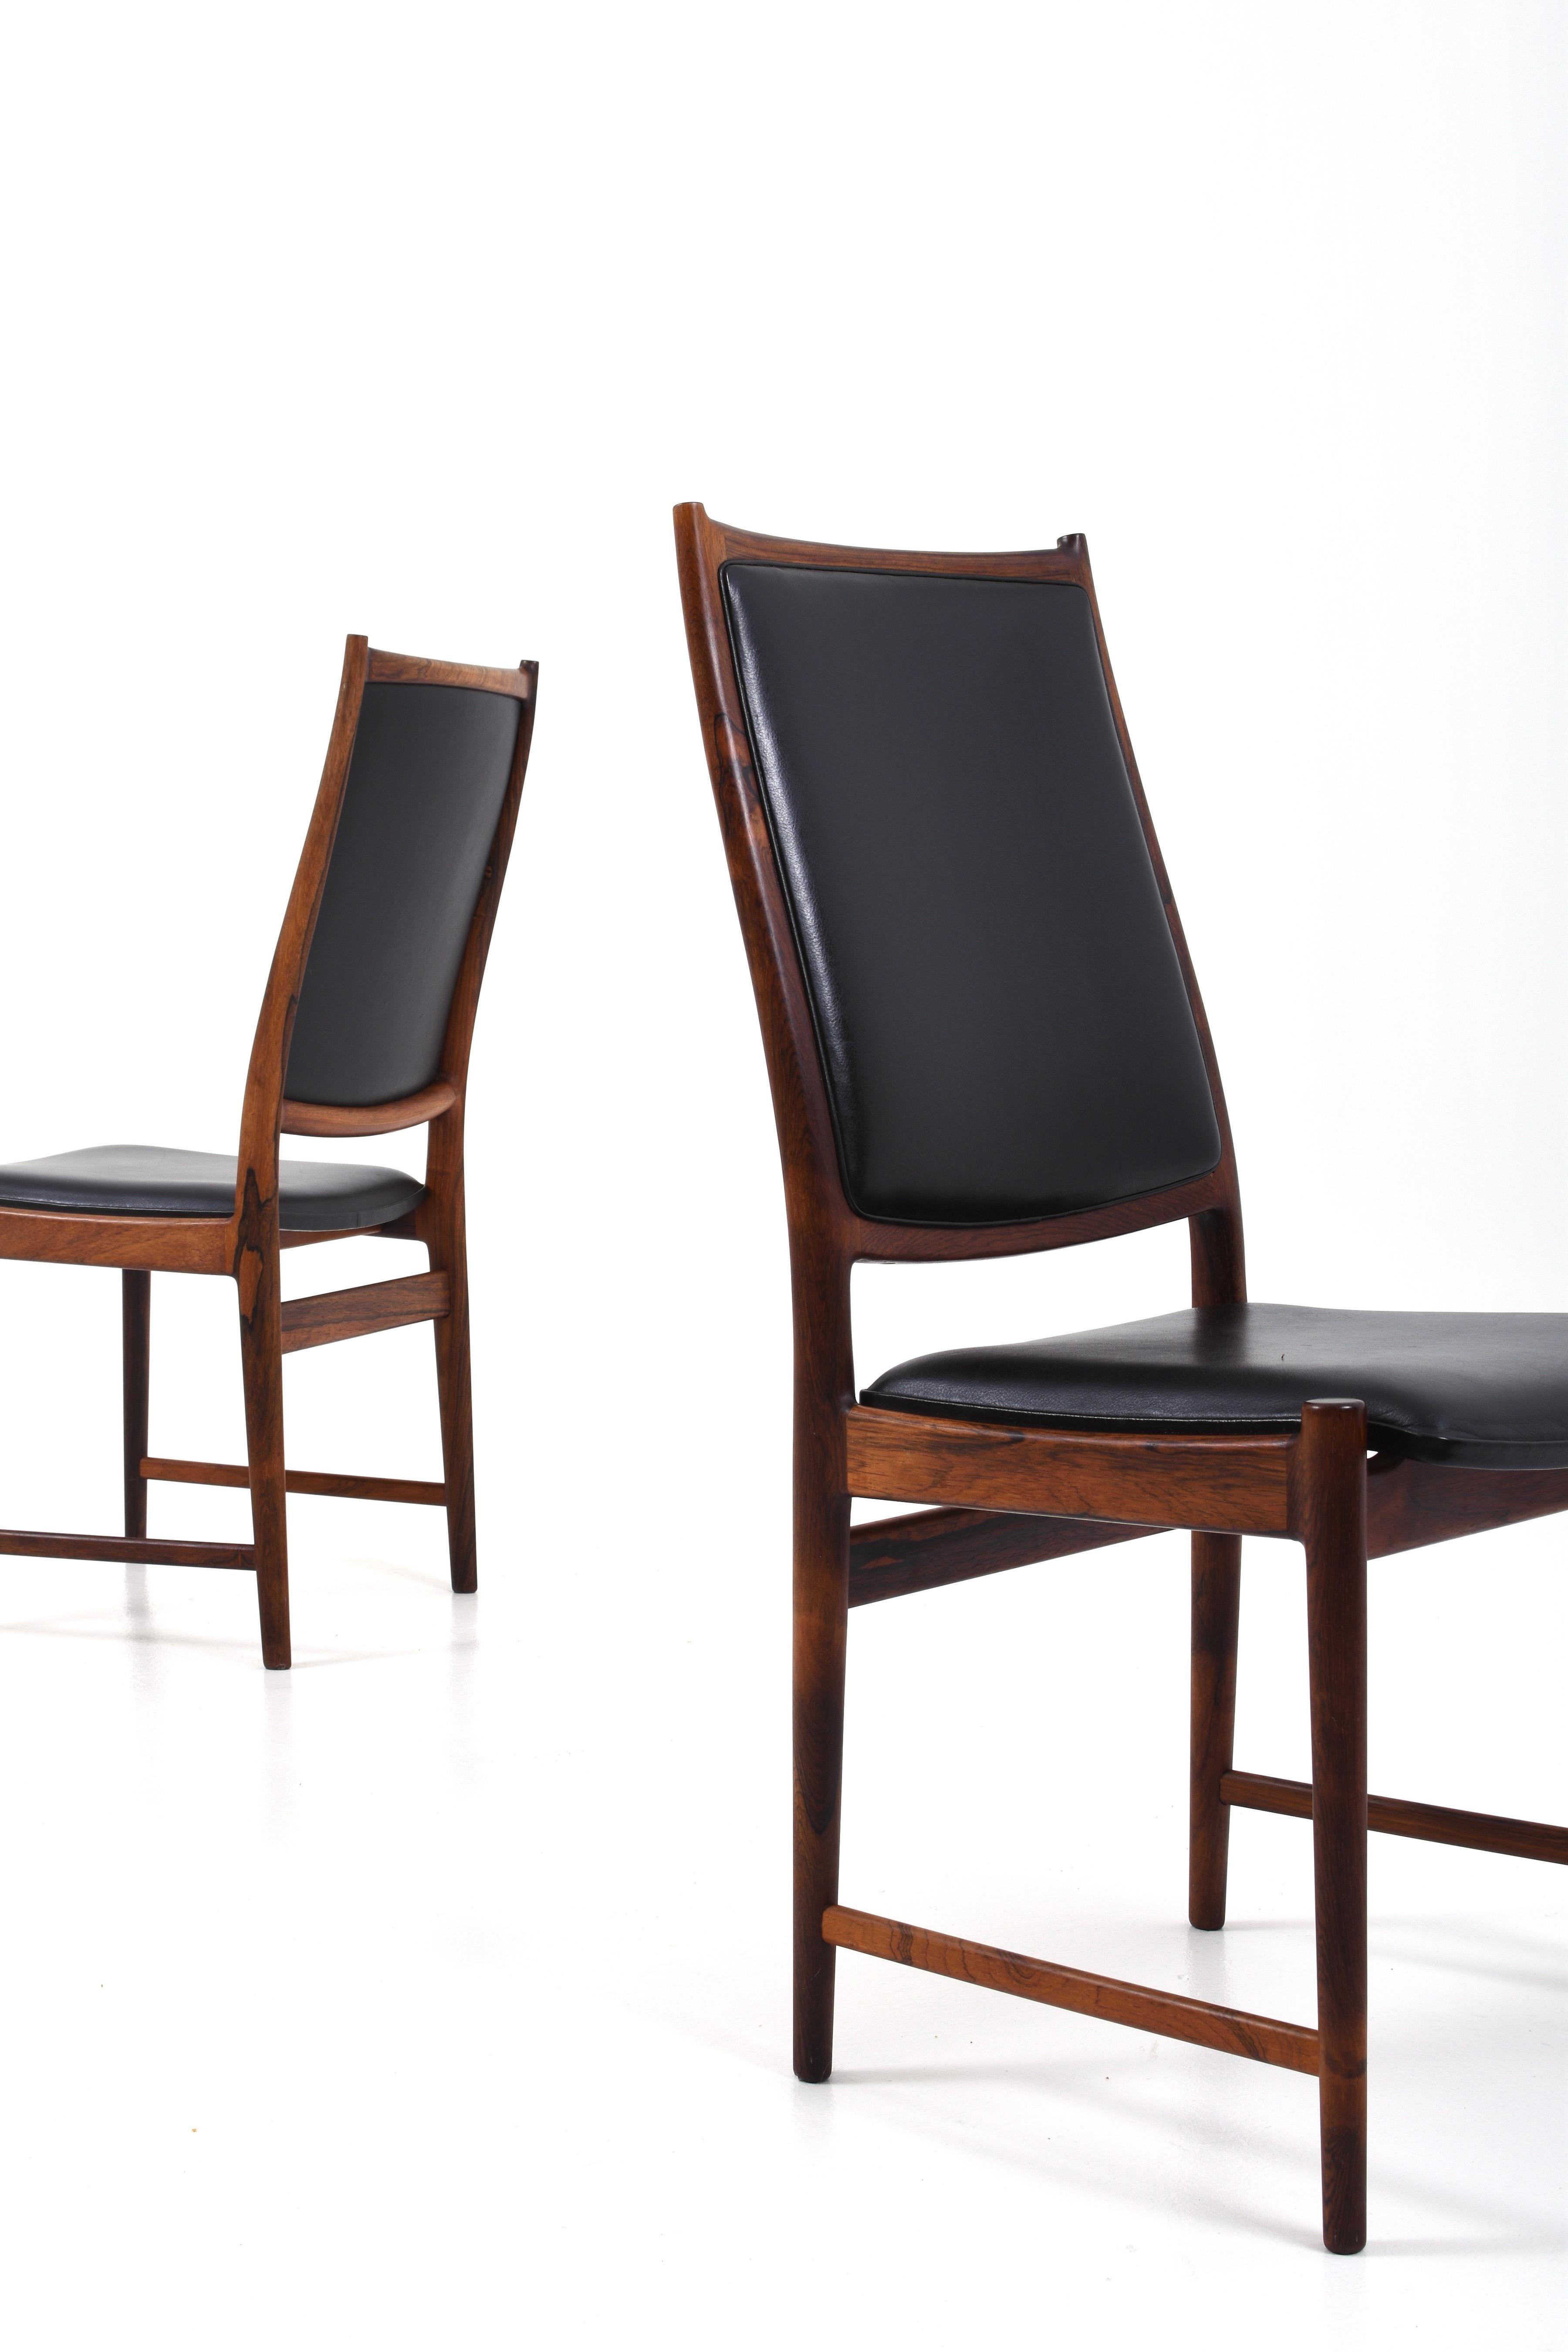 Six absolutely fantastic dining chairs by Norwegian Torbjørn Afdal for Nesjestranda møbelfabrikk.

The chairs are made of rosewood and covered with black leather. Very nice condition!